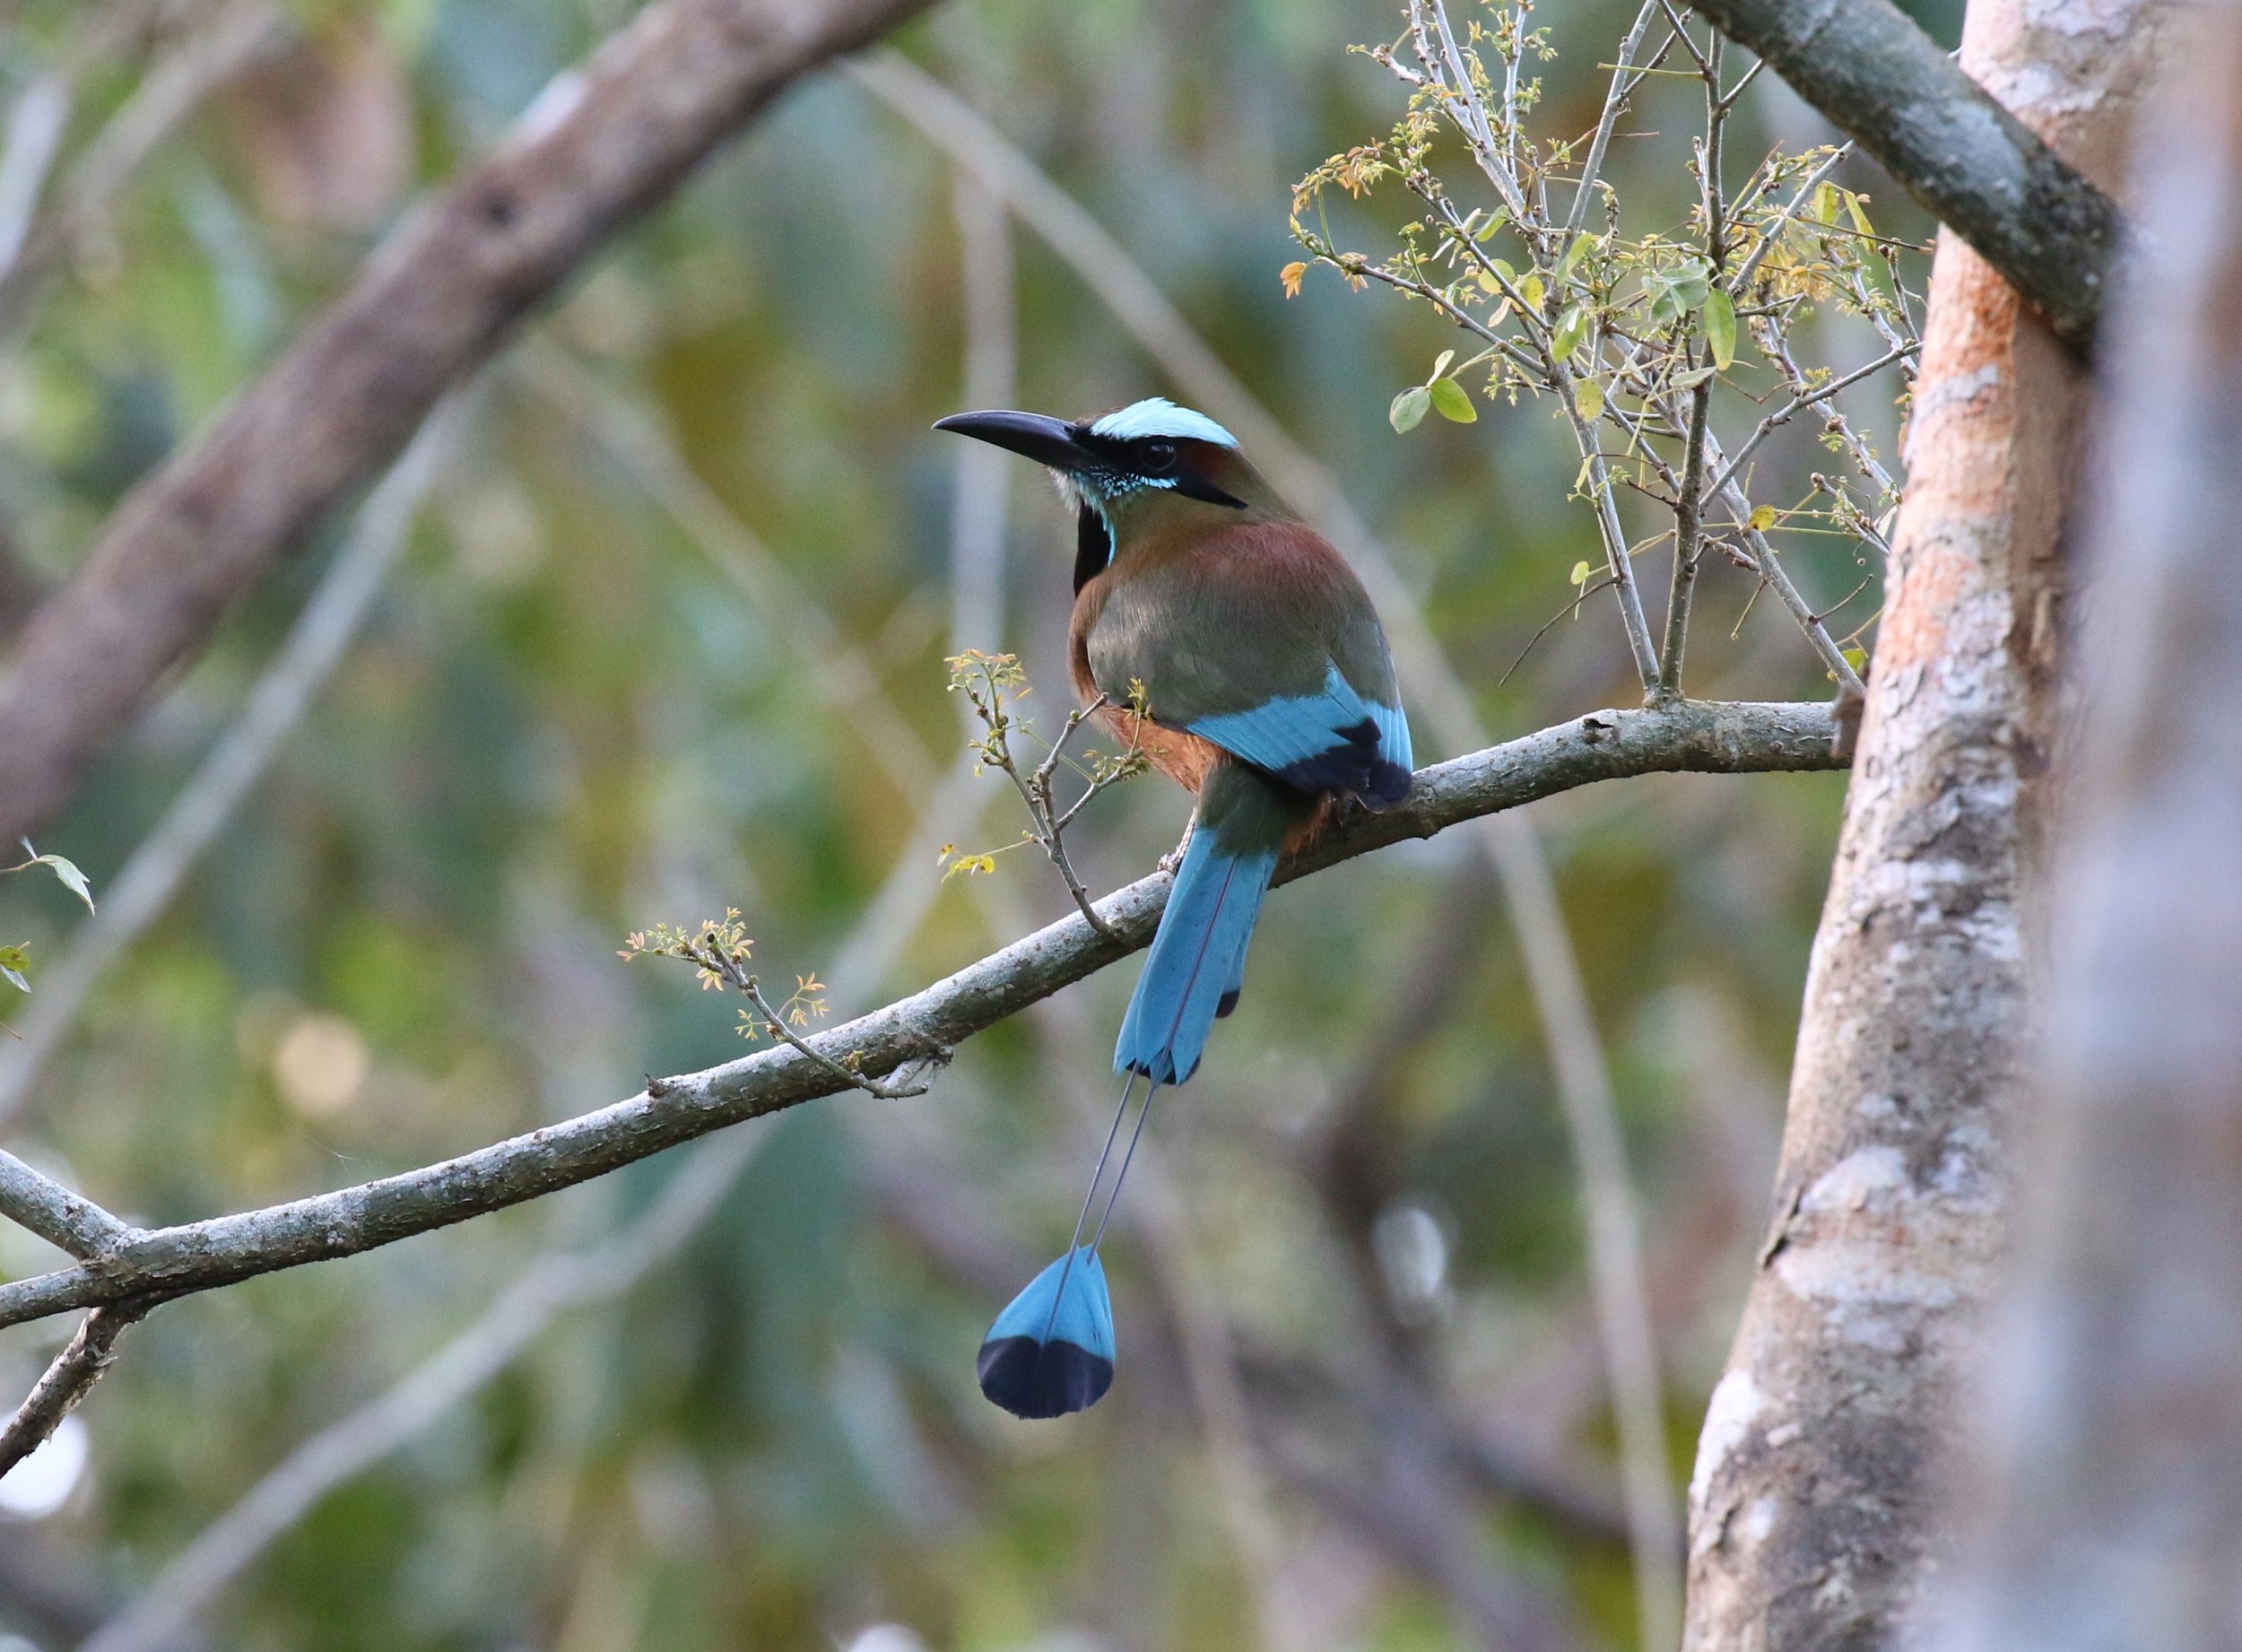 Turquoise-browed Motmot - photo by participant Diane Eubanks